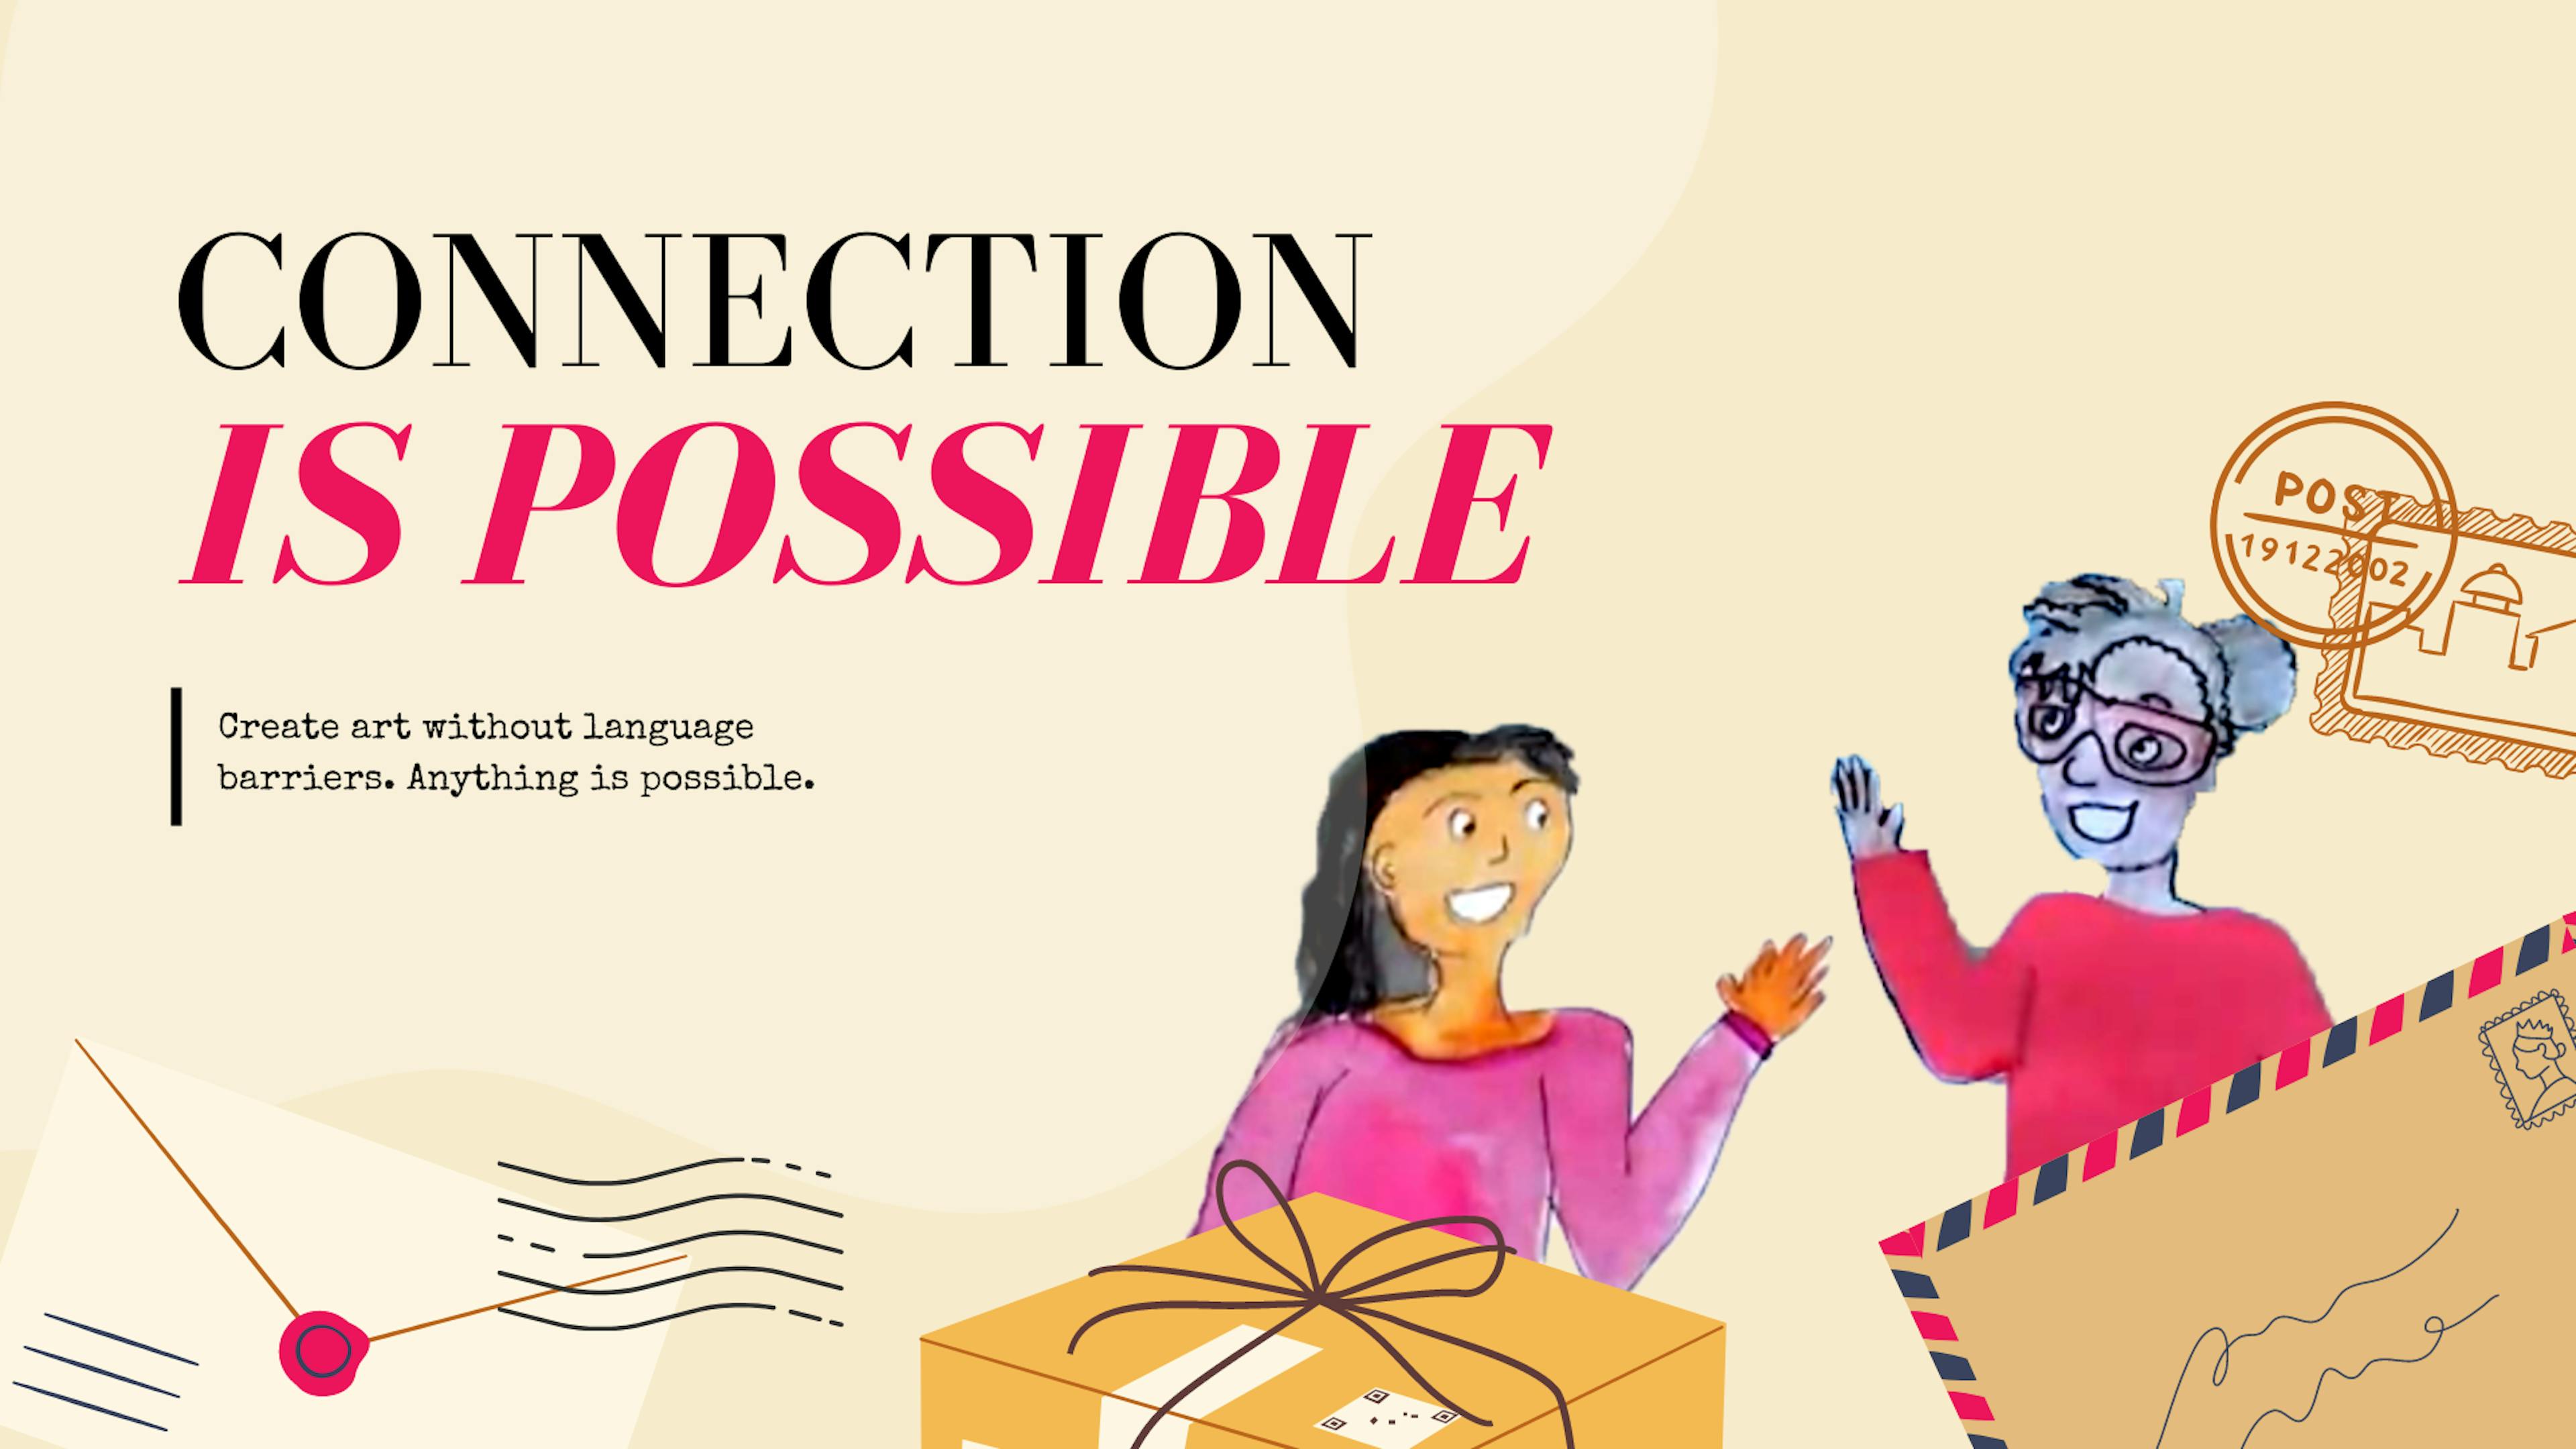 Image of two figures waving at each other. The text reads, "CONNECTION IS POSSIBLE" - Create art without language barriers. Anything is possible. Around teh figures there are letters, postage boxes and stamps. The two figures are wearing pink shirts